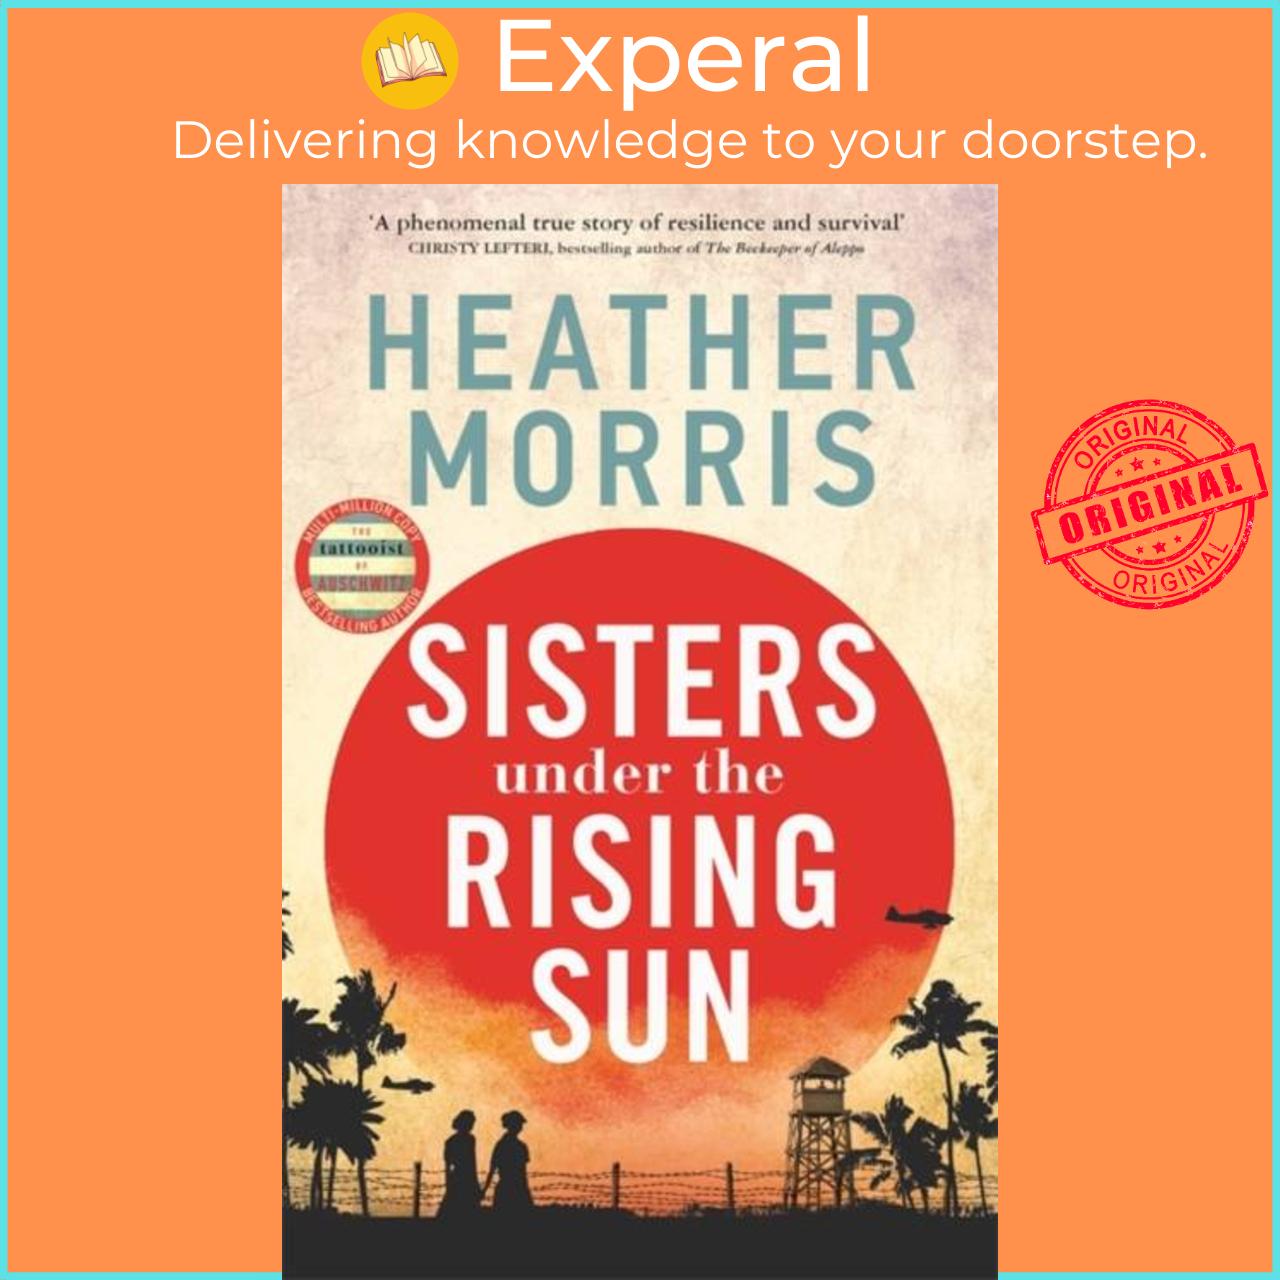 Sách - Sisters under the Rising Sun - A powerful story from the author of The  by Heather Morris (UK edition, hardcover)